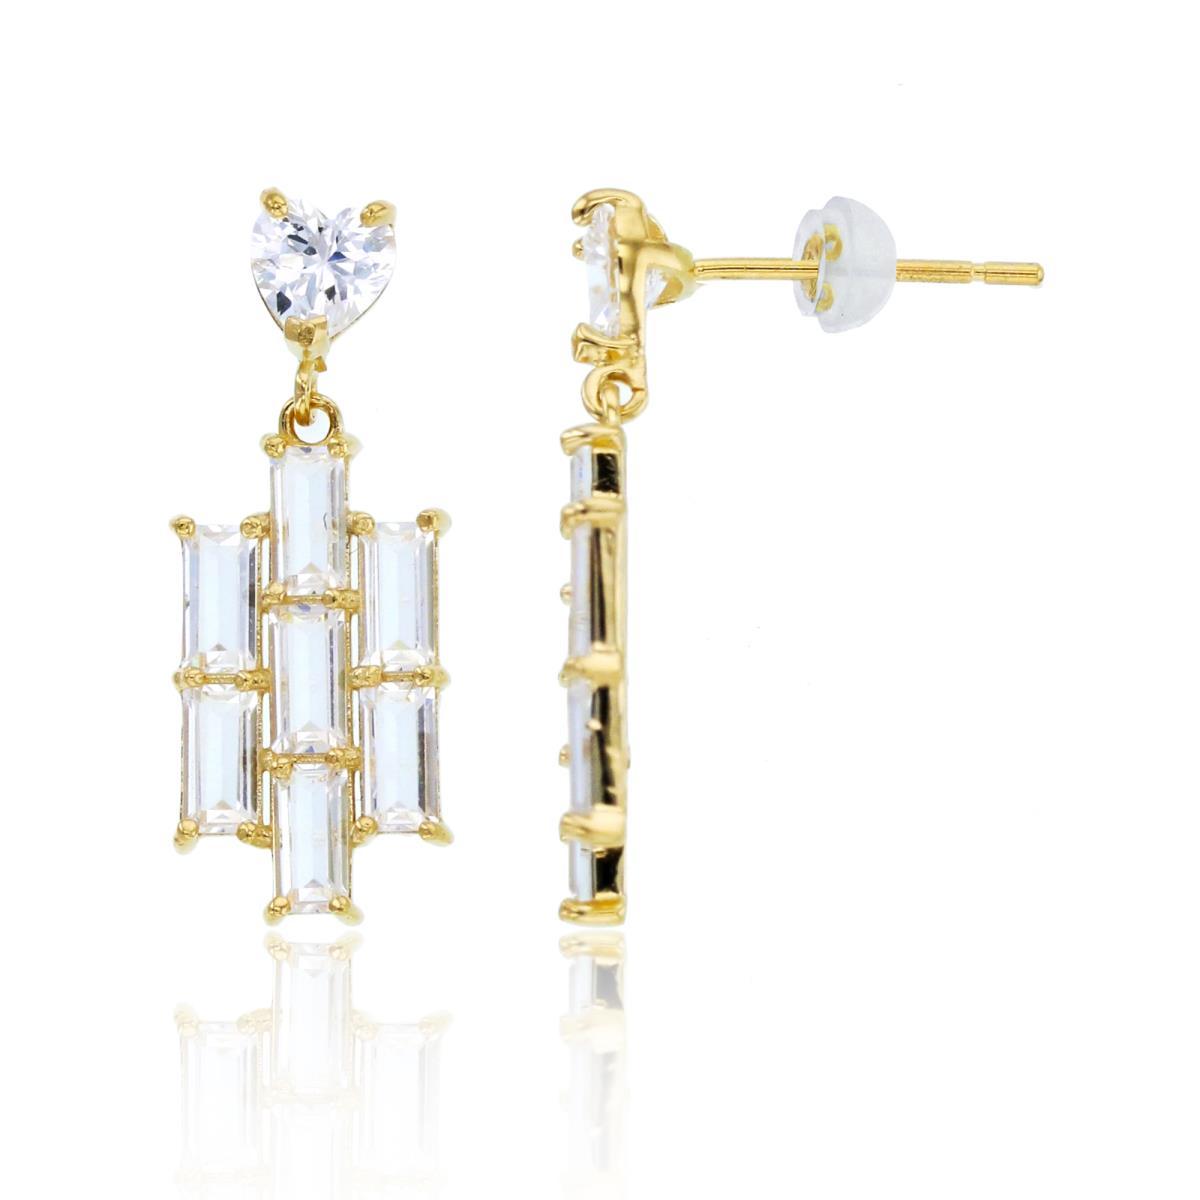 10K Yellow Gold HS & SB CZ Chandelier Earrings with Silicone Backs